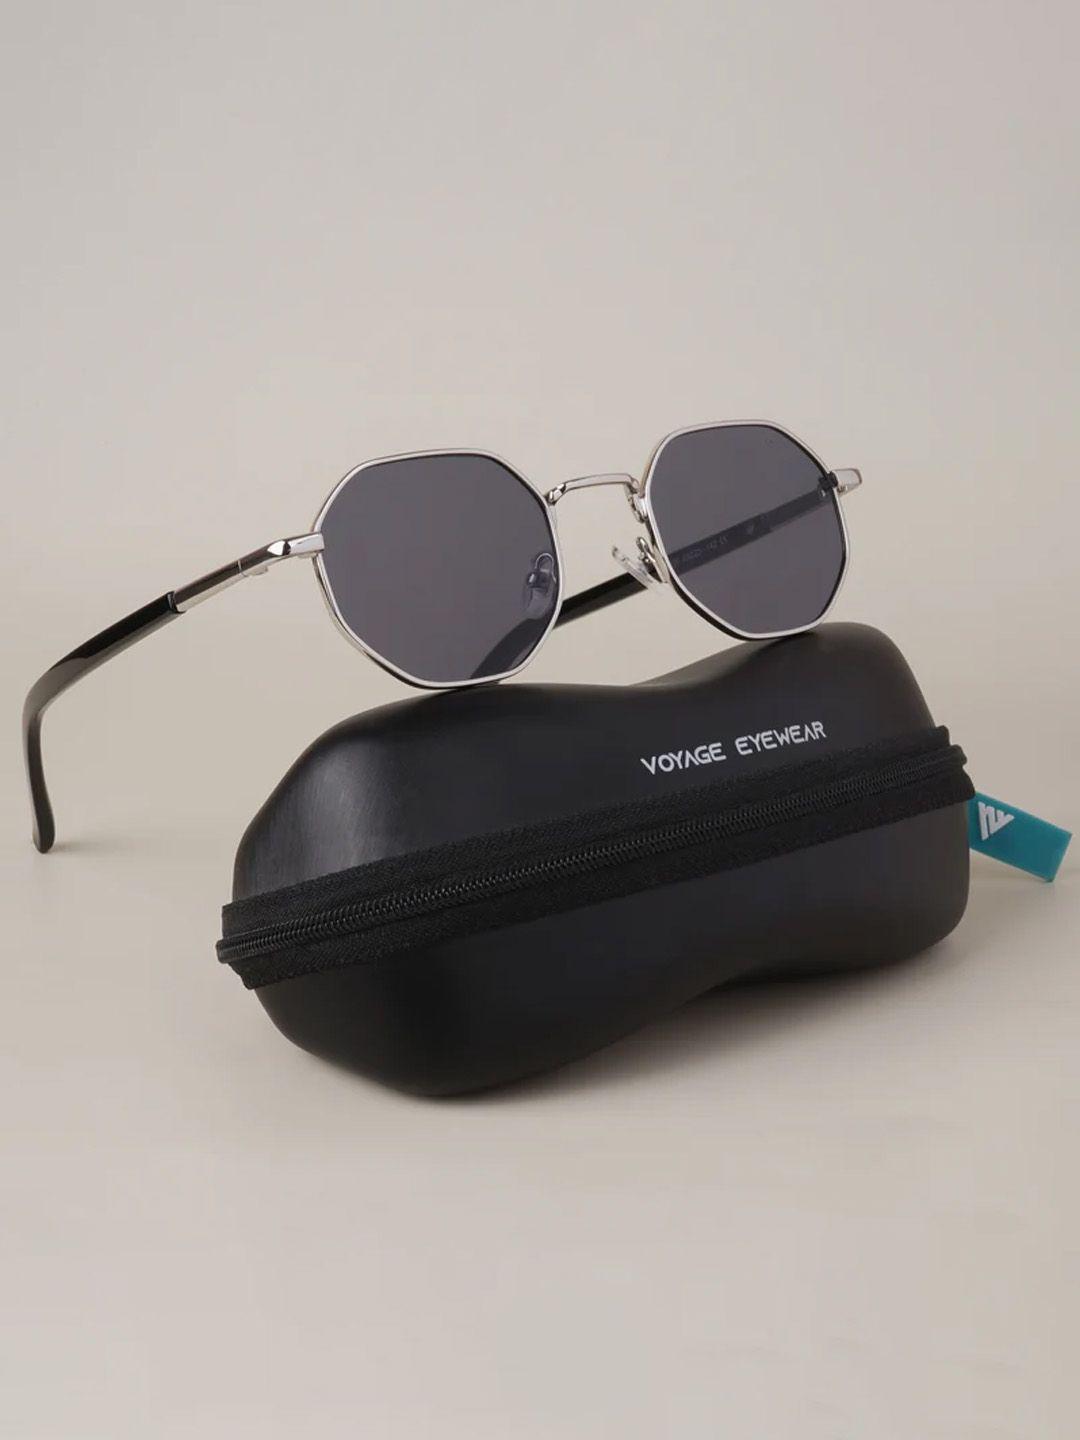 Voyage Unisex Black Lens & Silver-Toned Round Sunglasses with UV Protected Lens